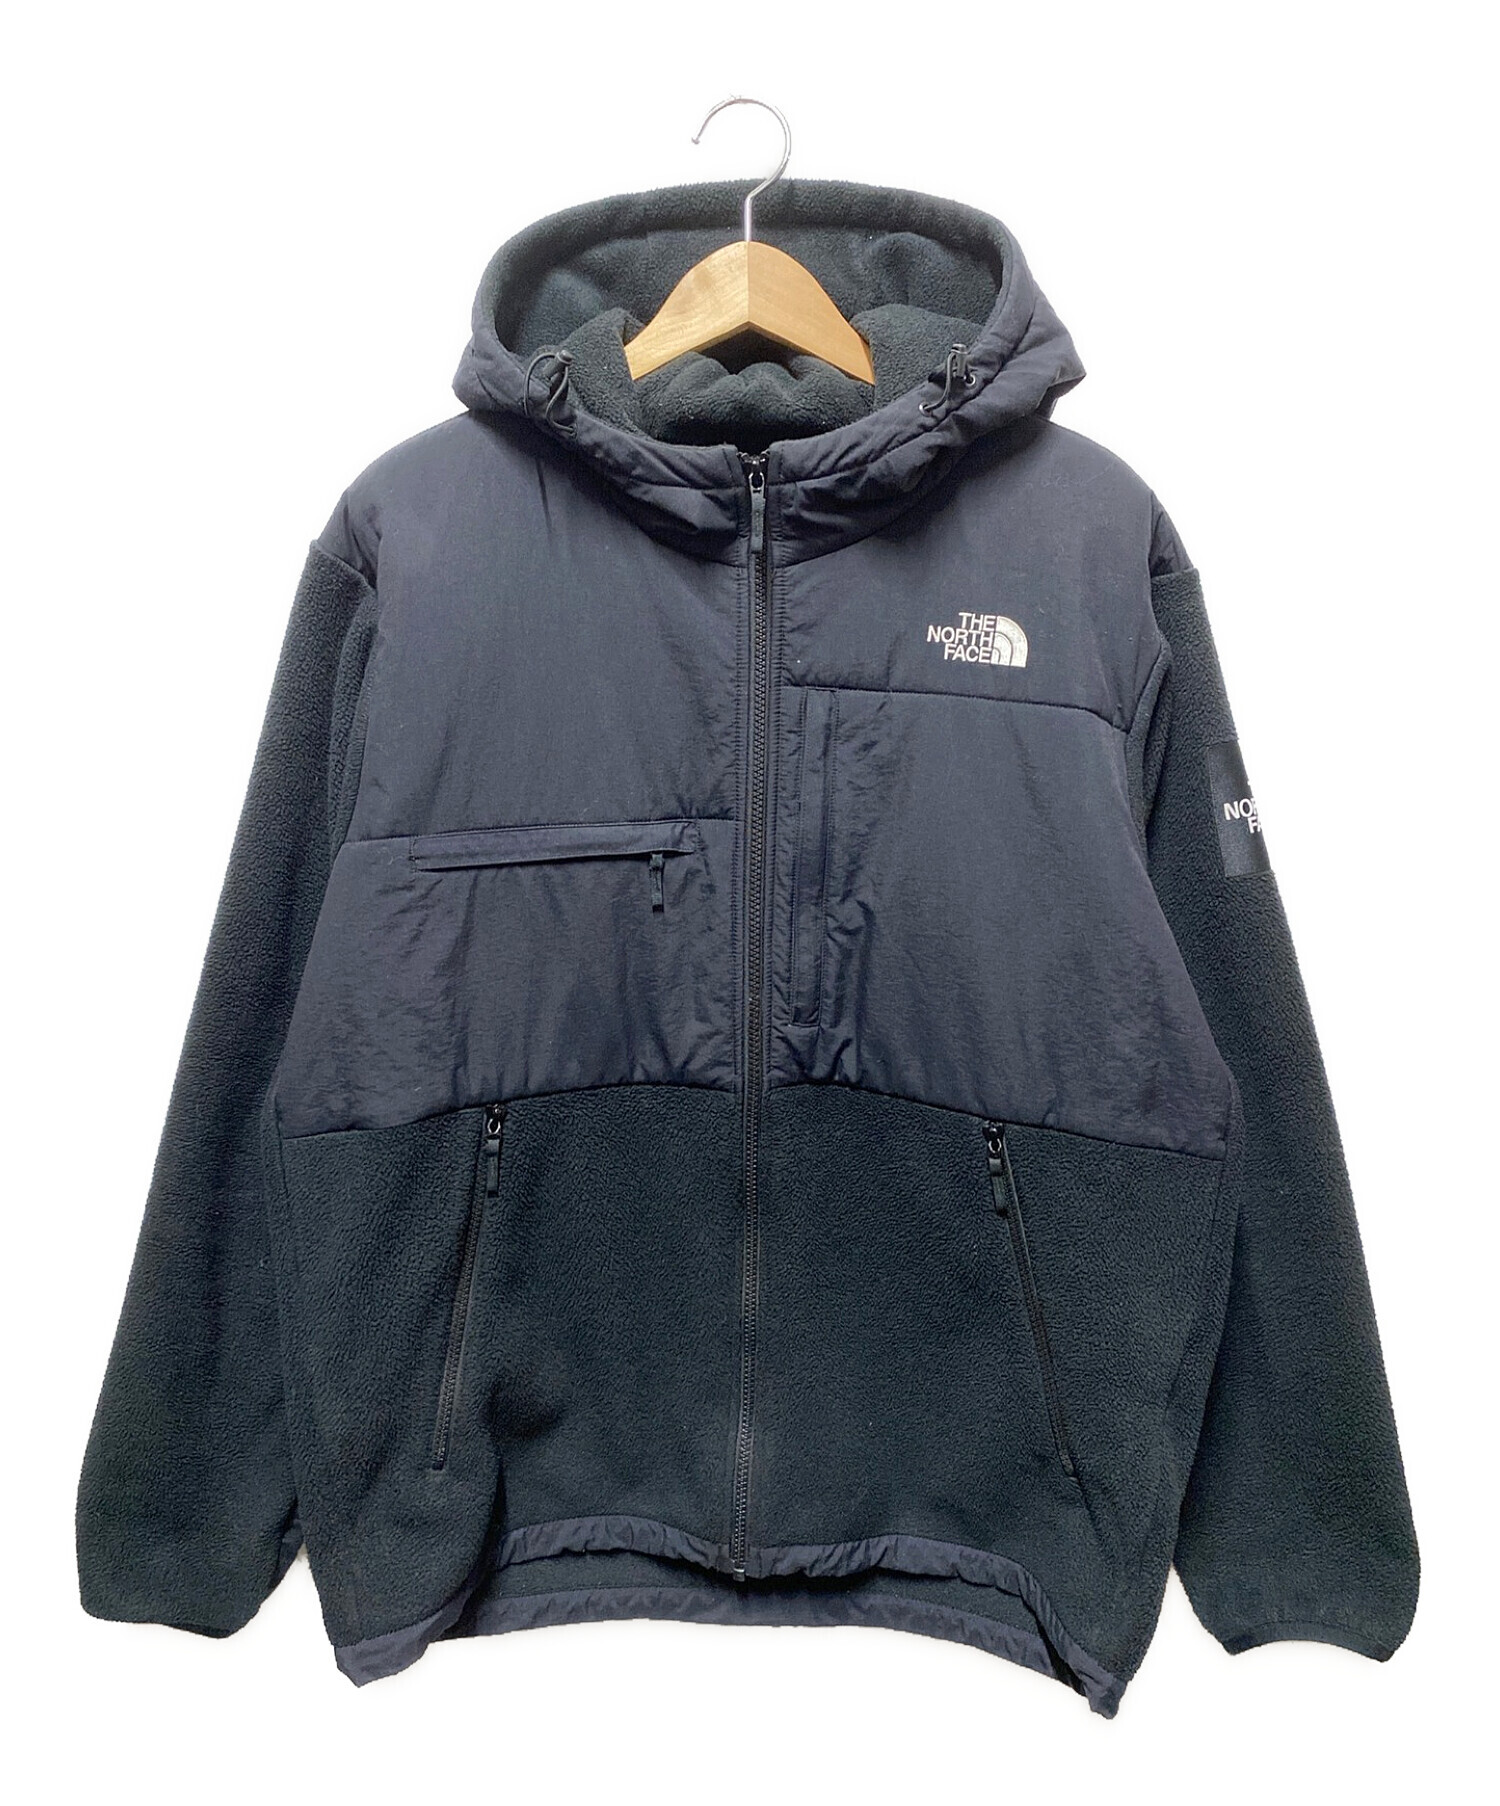 THE NORTH FACE DENALI HOODIE JACKET XL 抹